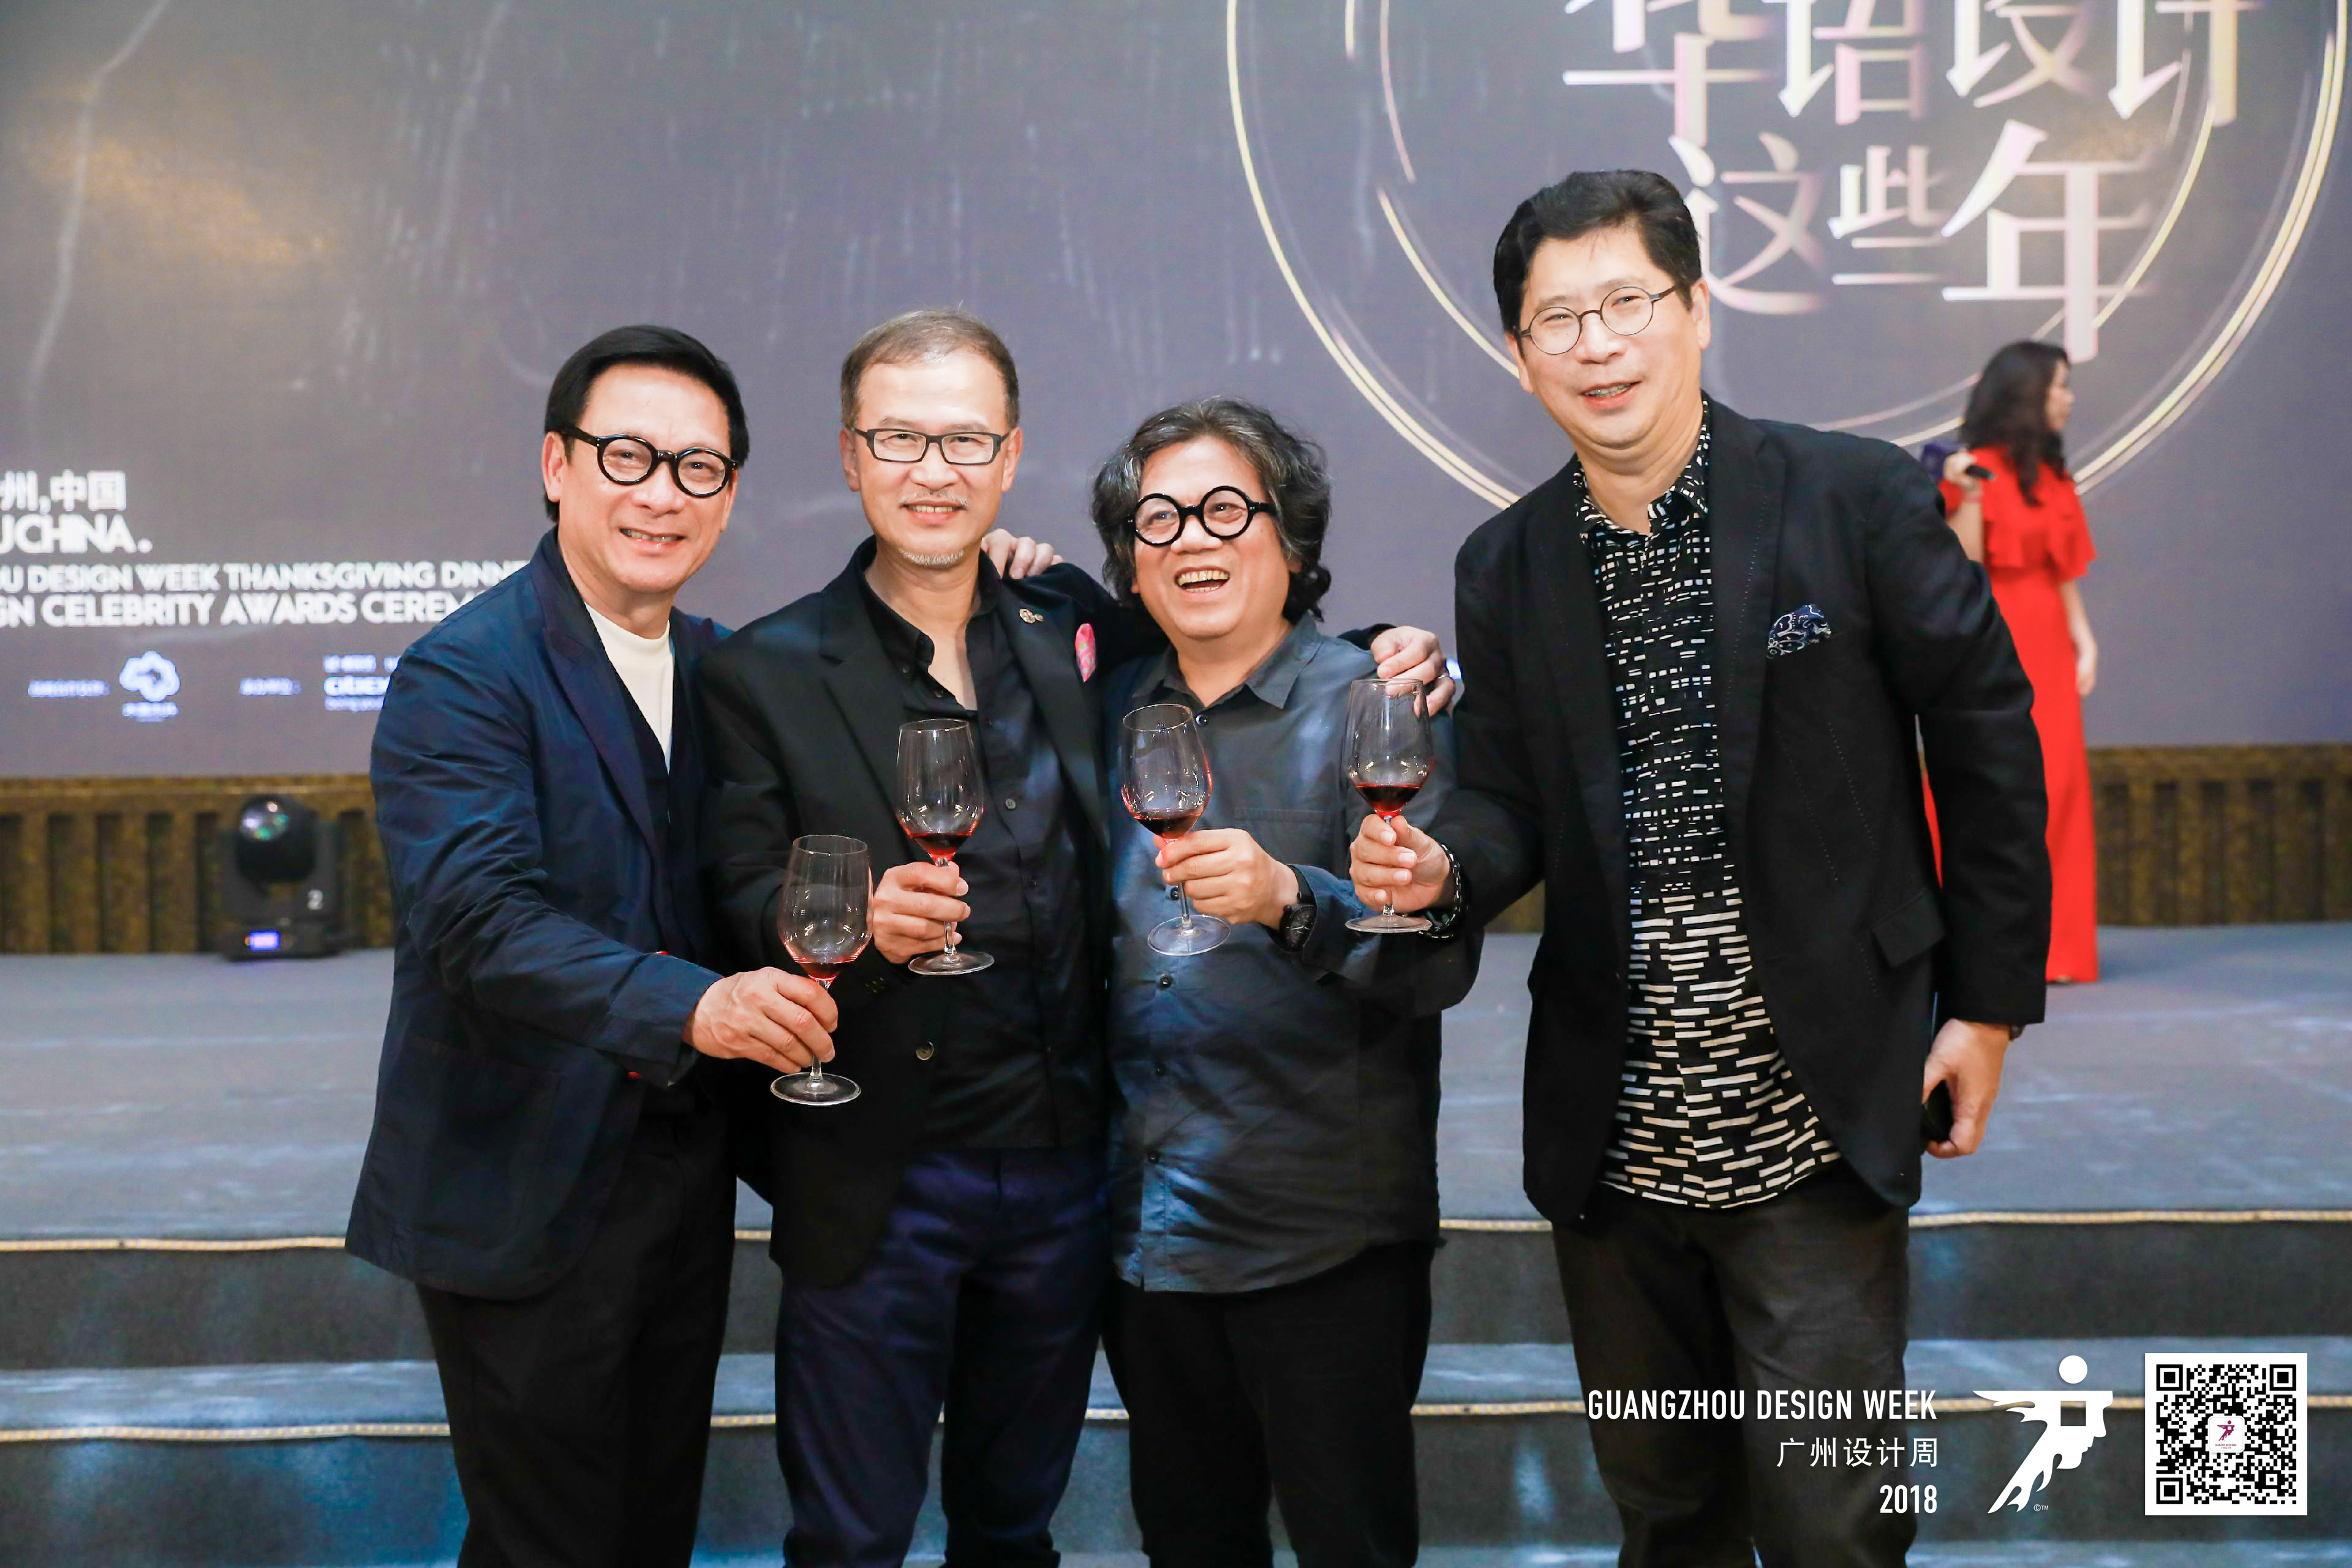 Chief Designer of J&A, Mr. Jiang Feng was awarded the title of "Chinese Chinese Design Leader"